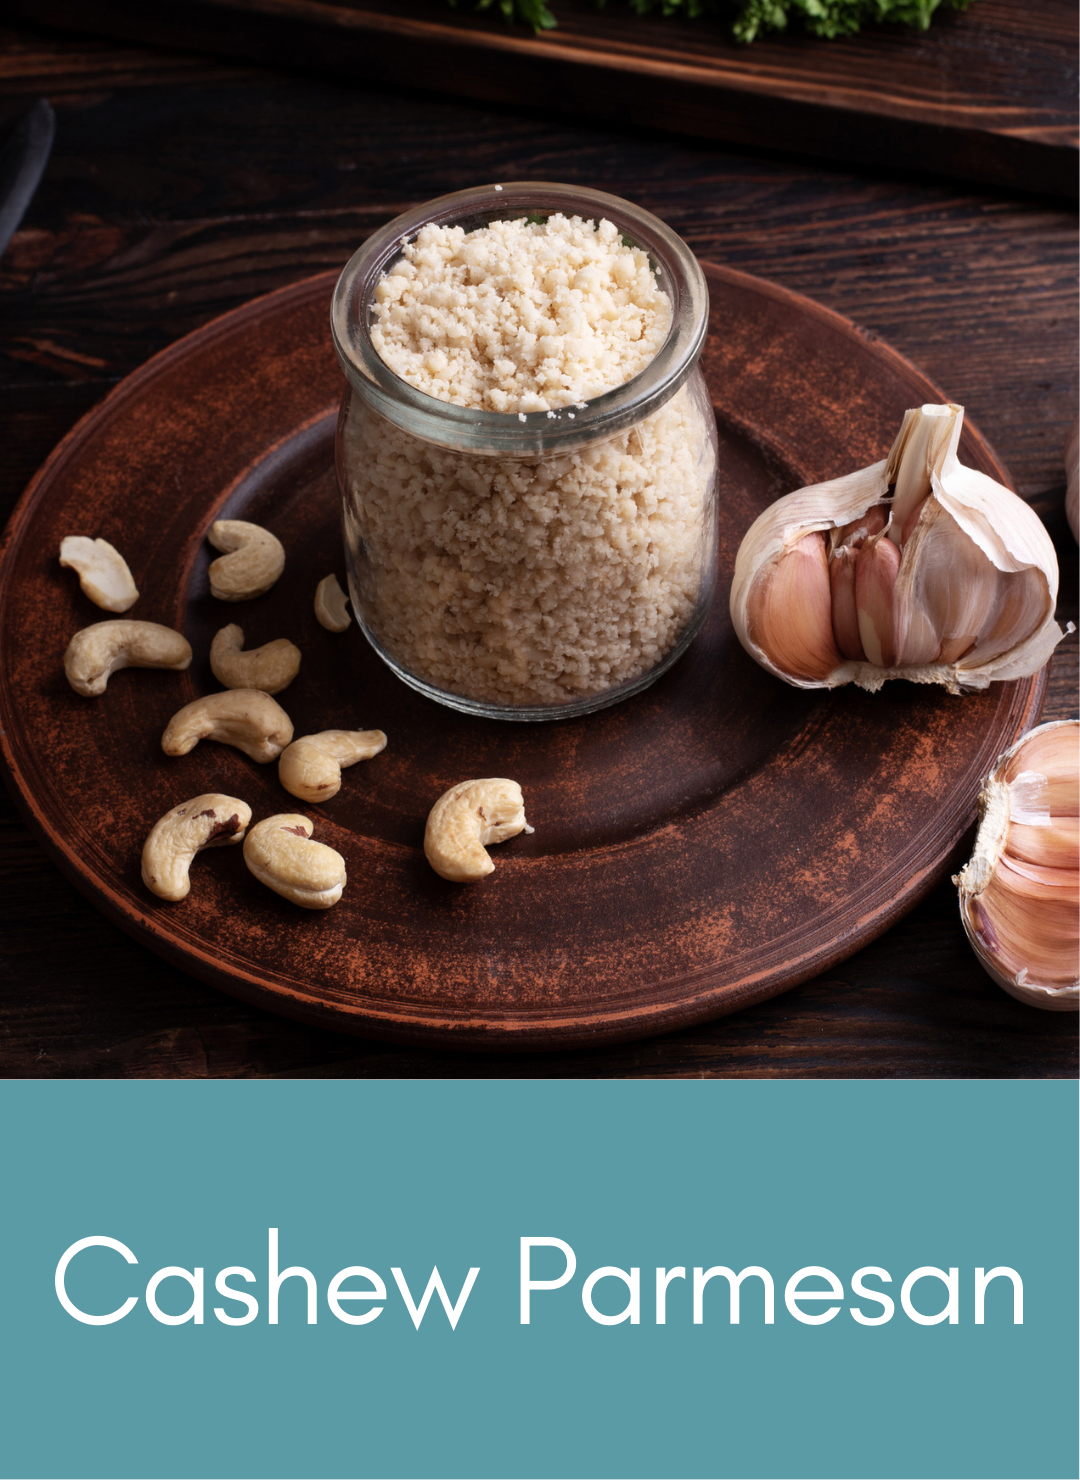 Whole food plant based cashew parmesan Picture with link to recipe